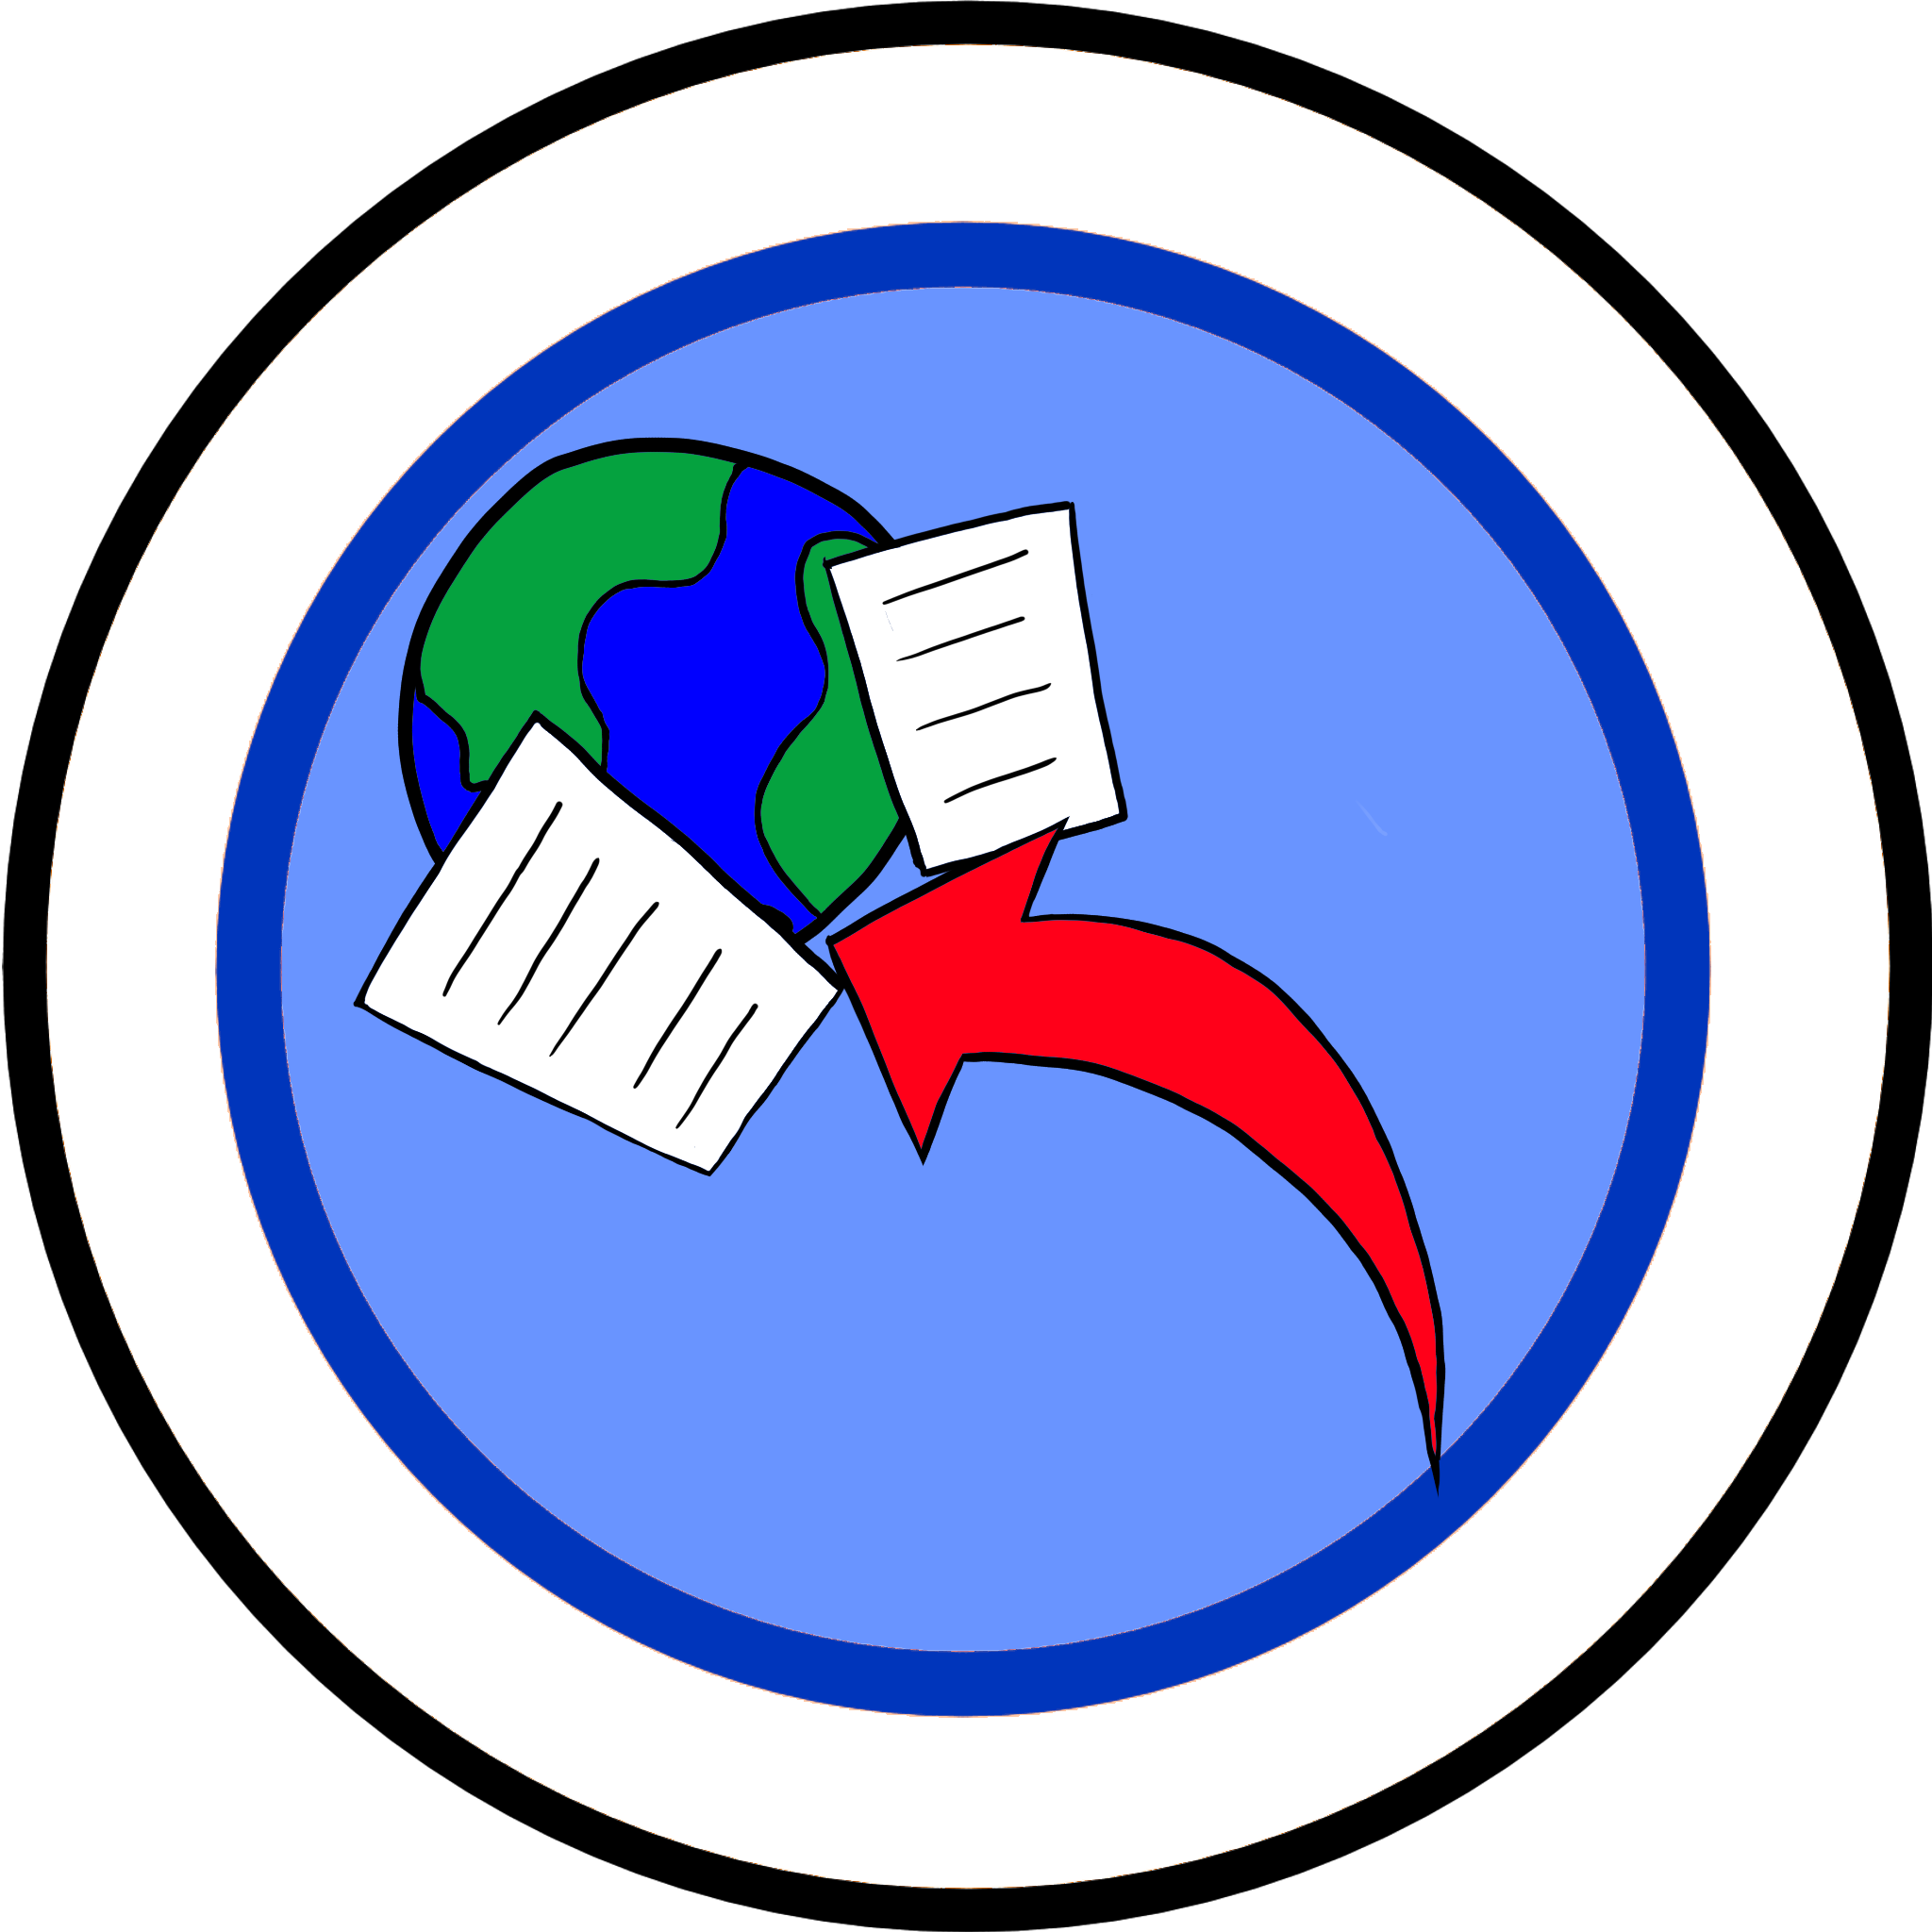 A small logo representing html-gen - consists of some arrows pointing to some free notes above a globe